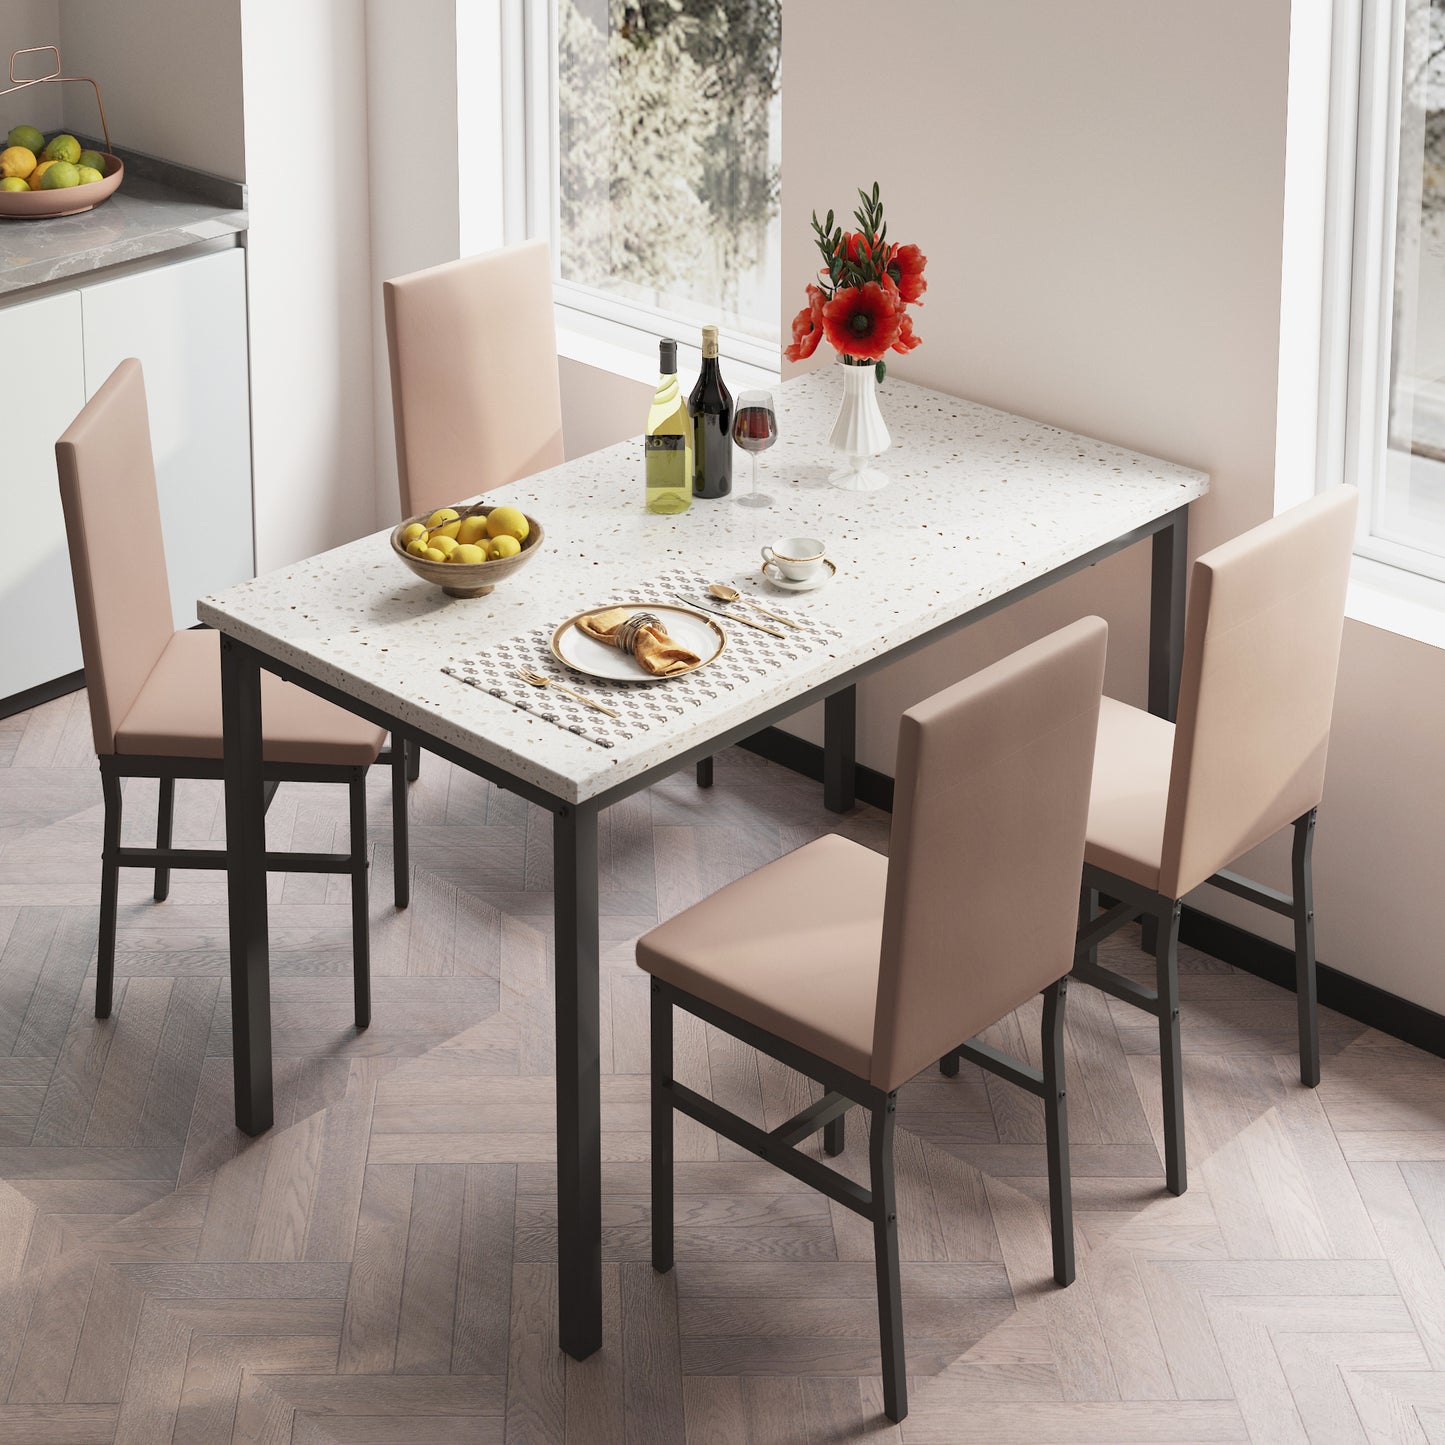 Modern Dining Table Set for 6, SYNGAR Faux Marble Table and PU Leather Upholstered Chairs Set, 7 Piece Kitchen Dining Set, Dining Table and Chairs Set for Small Space, Breakfast Nook, D9208